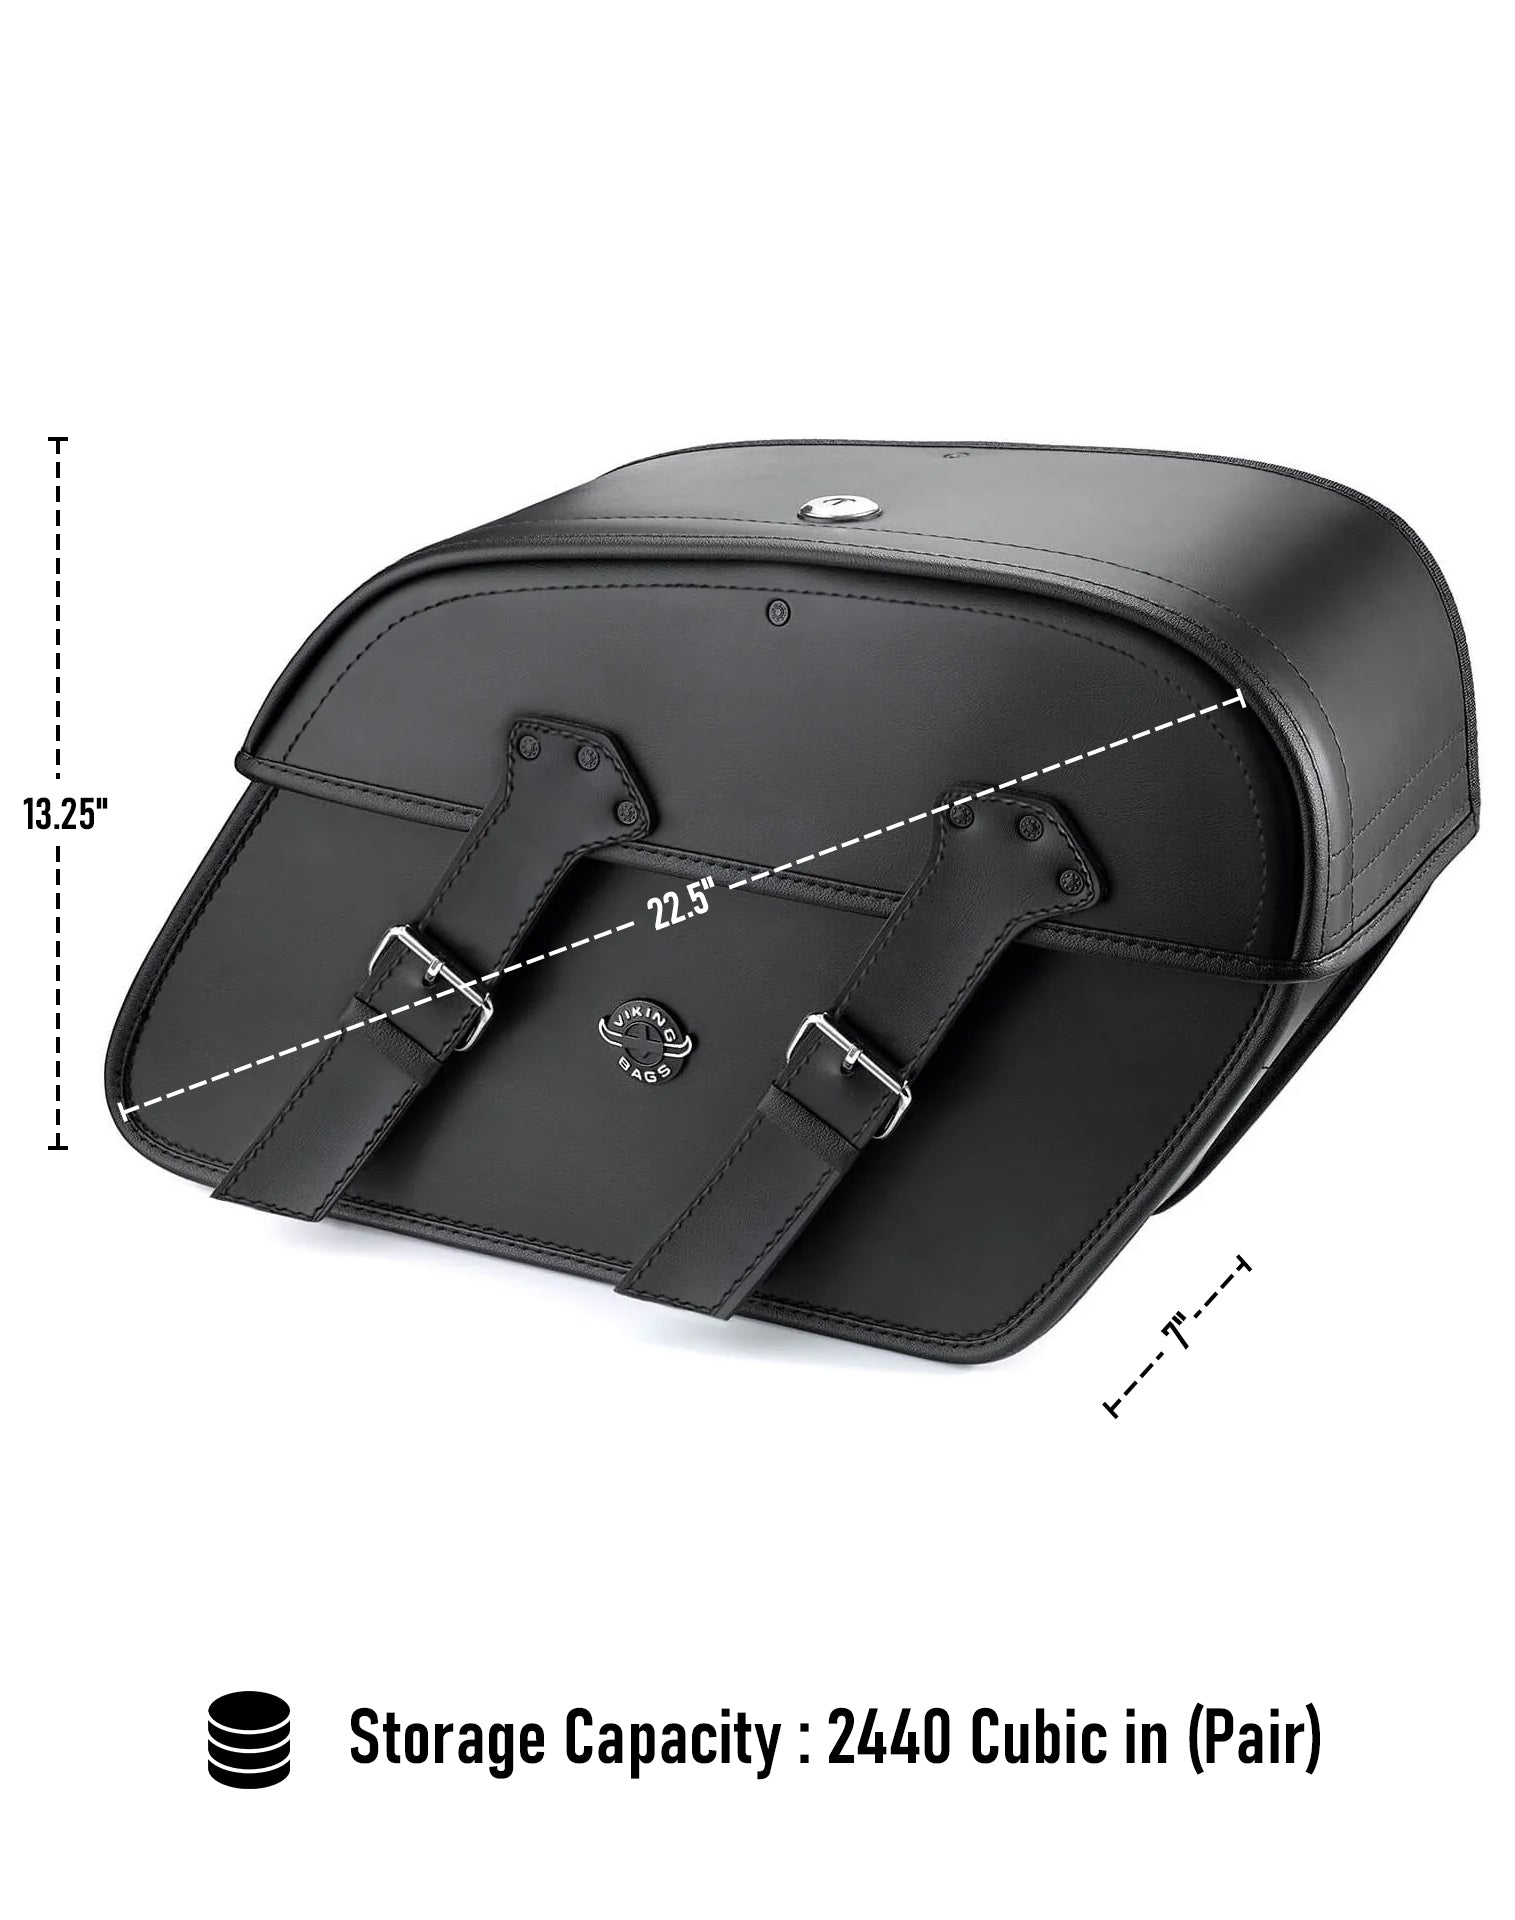 Viking Raven Extra Large Suzuki Boulevard M90 Vz1500 Leather Motorcycle Saddlebags Can Store Your Ridings Gears